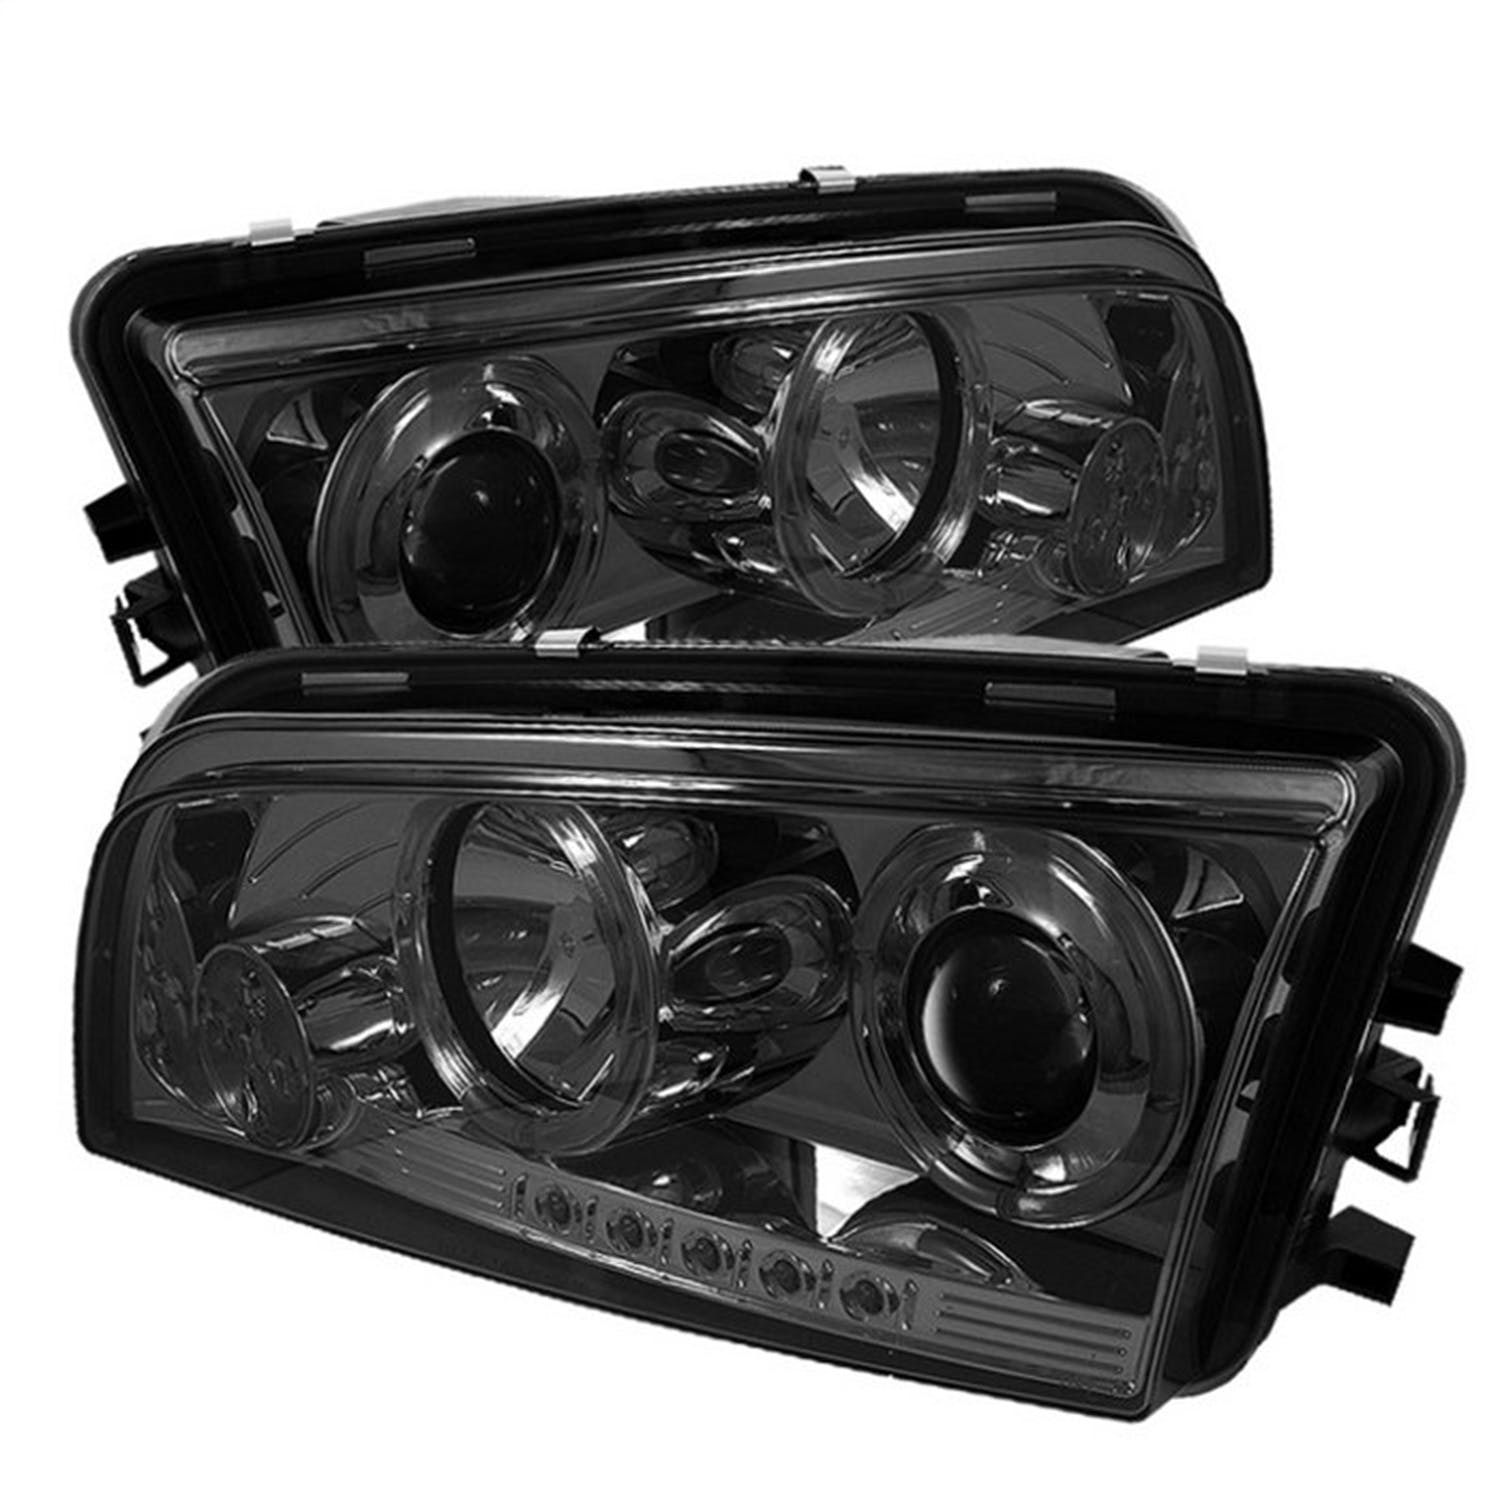 Spyder Auto 5009753 (Spyder) Dodge Charger 06-10 Projector Headlights-Halogen Model Only ( Not Compa